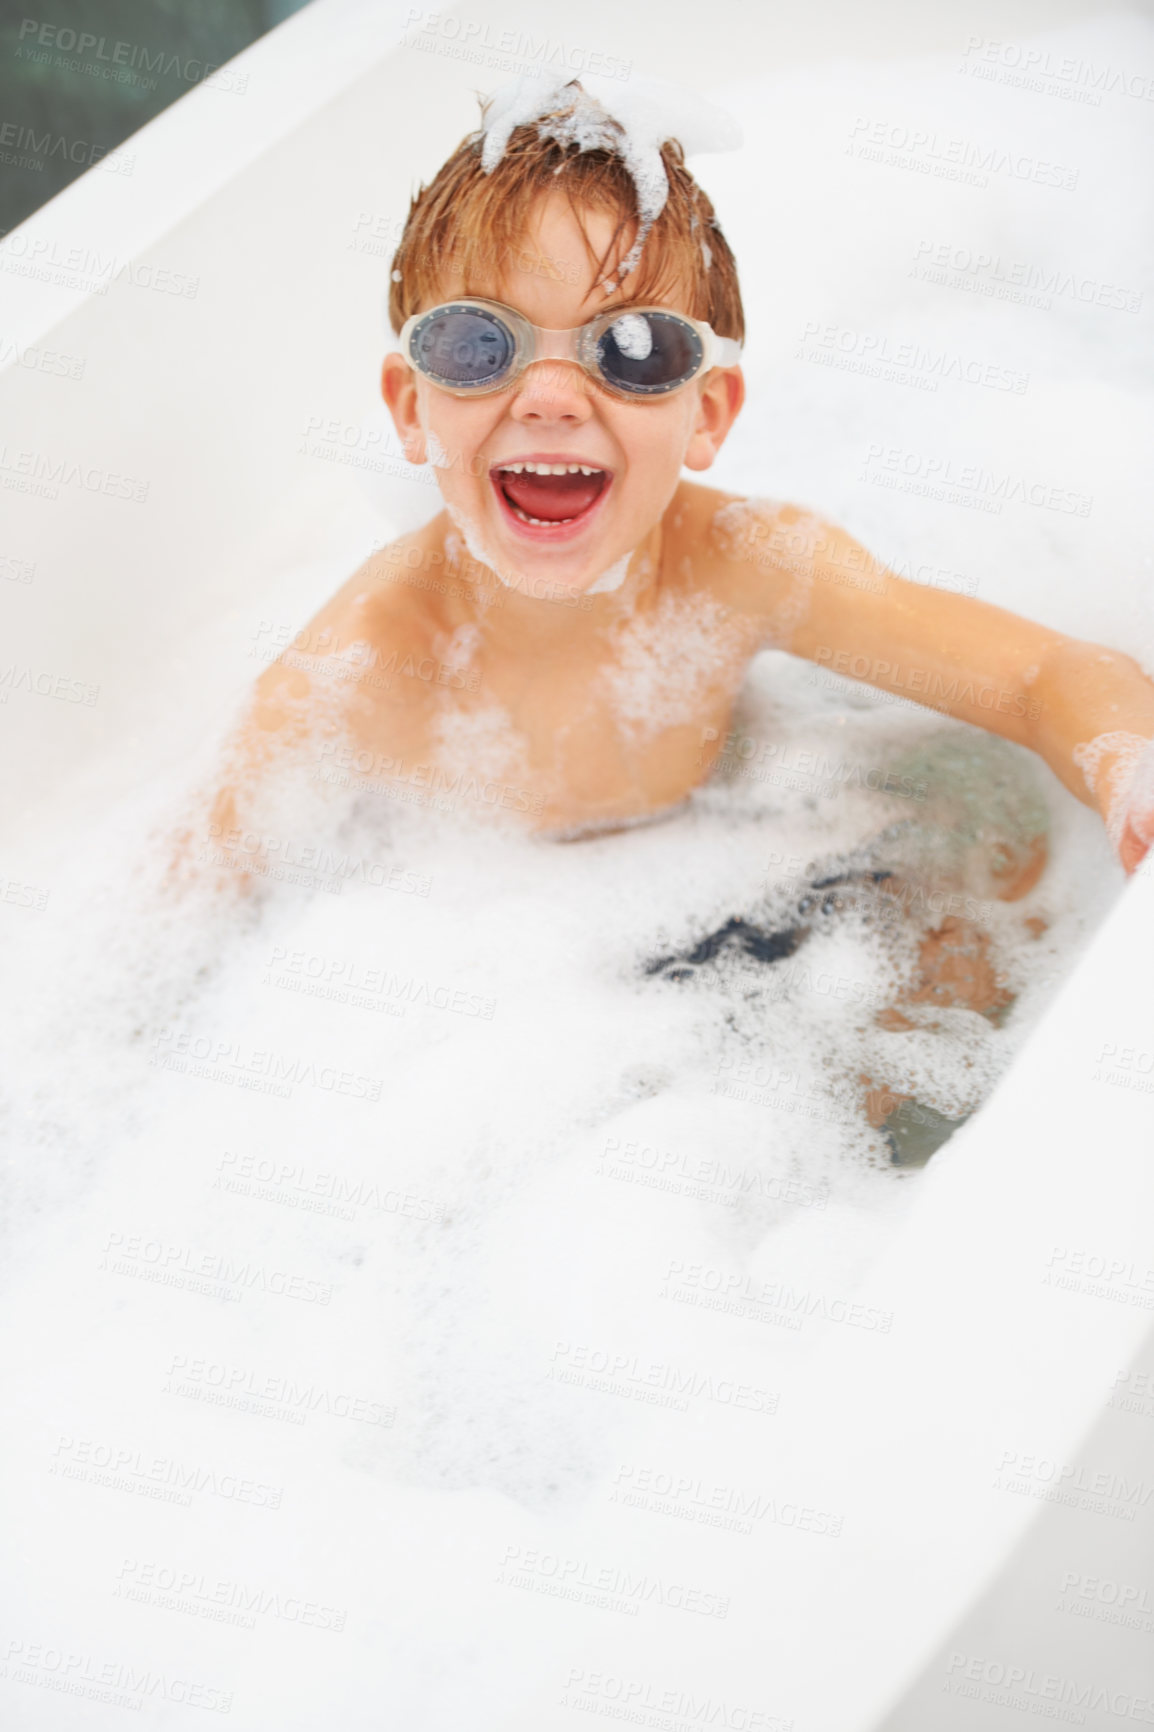 Buy stock photo Portrait of a cute young boy bathing with goggles